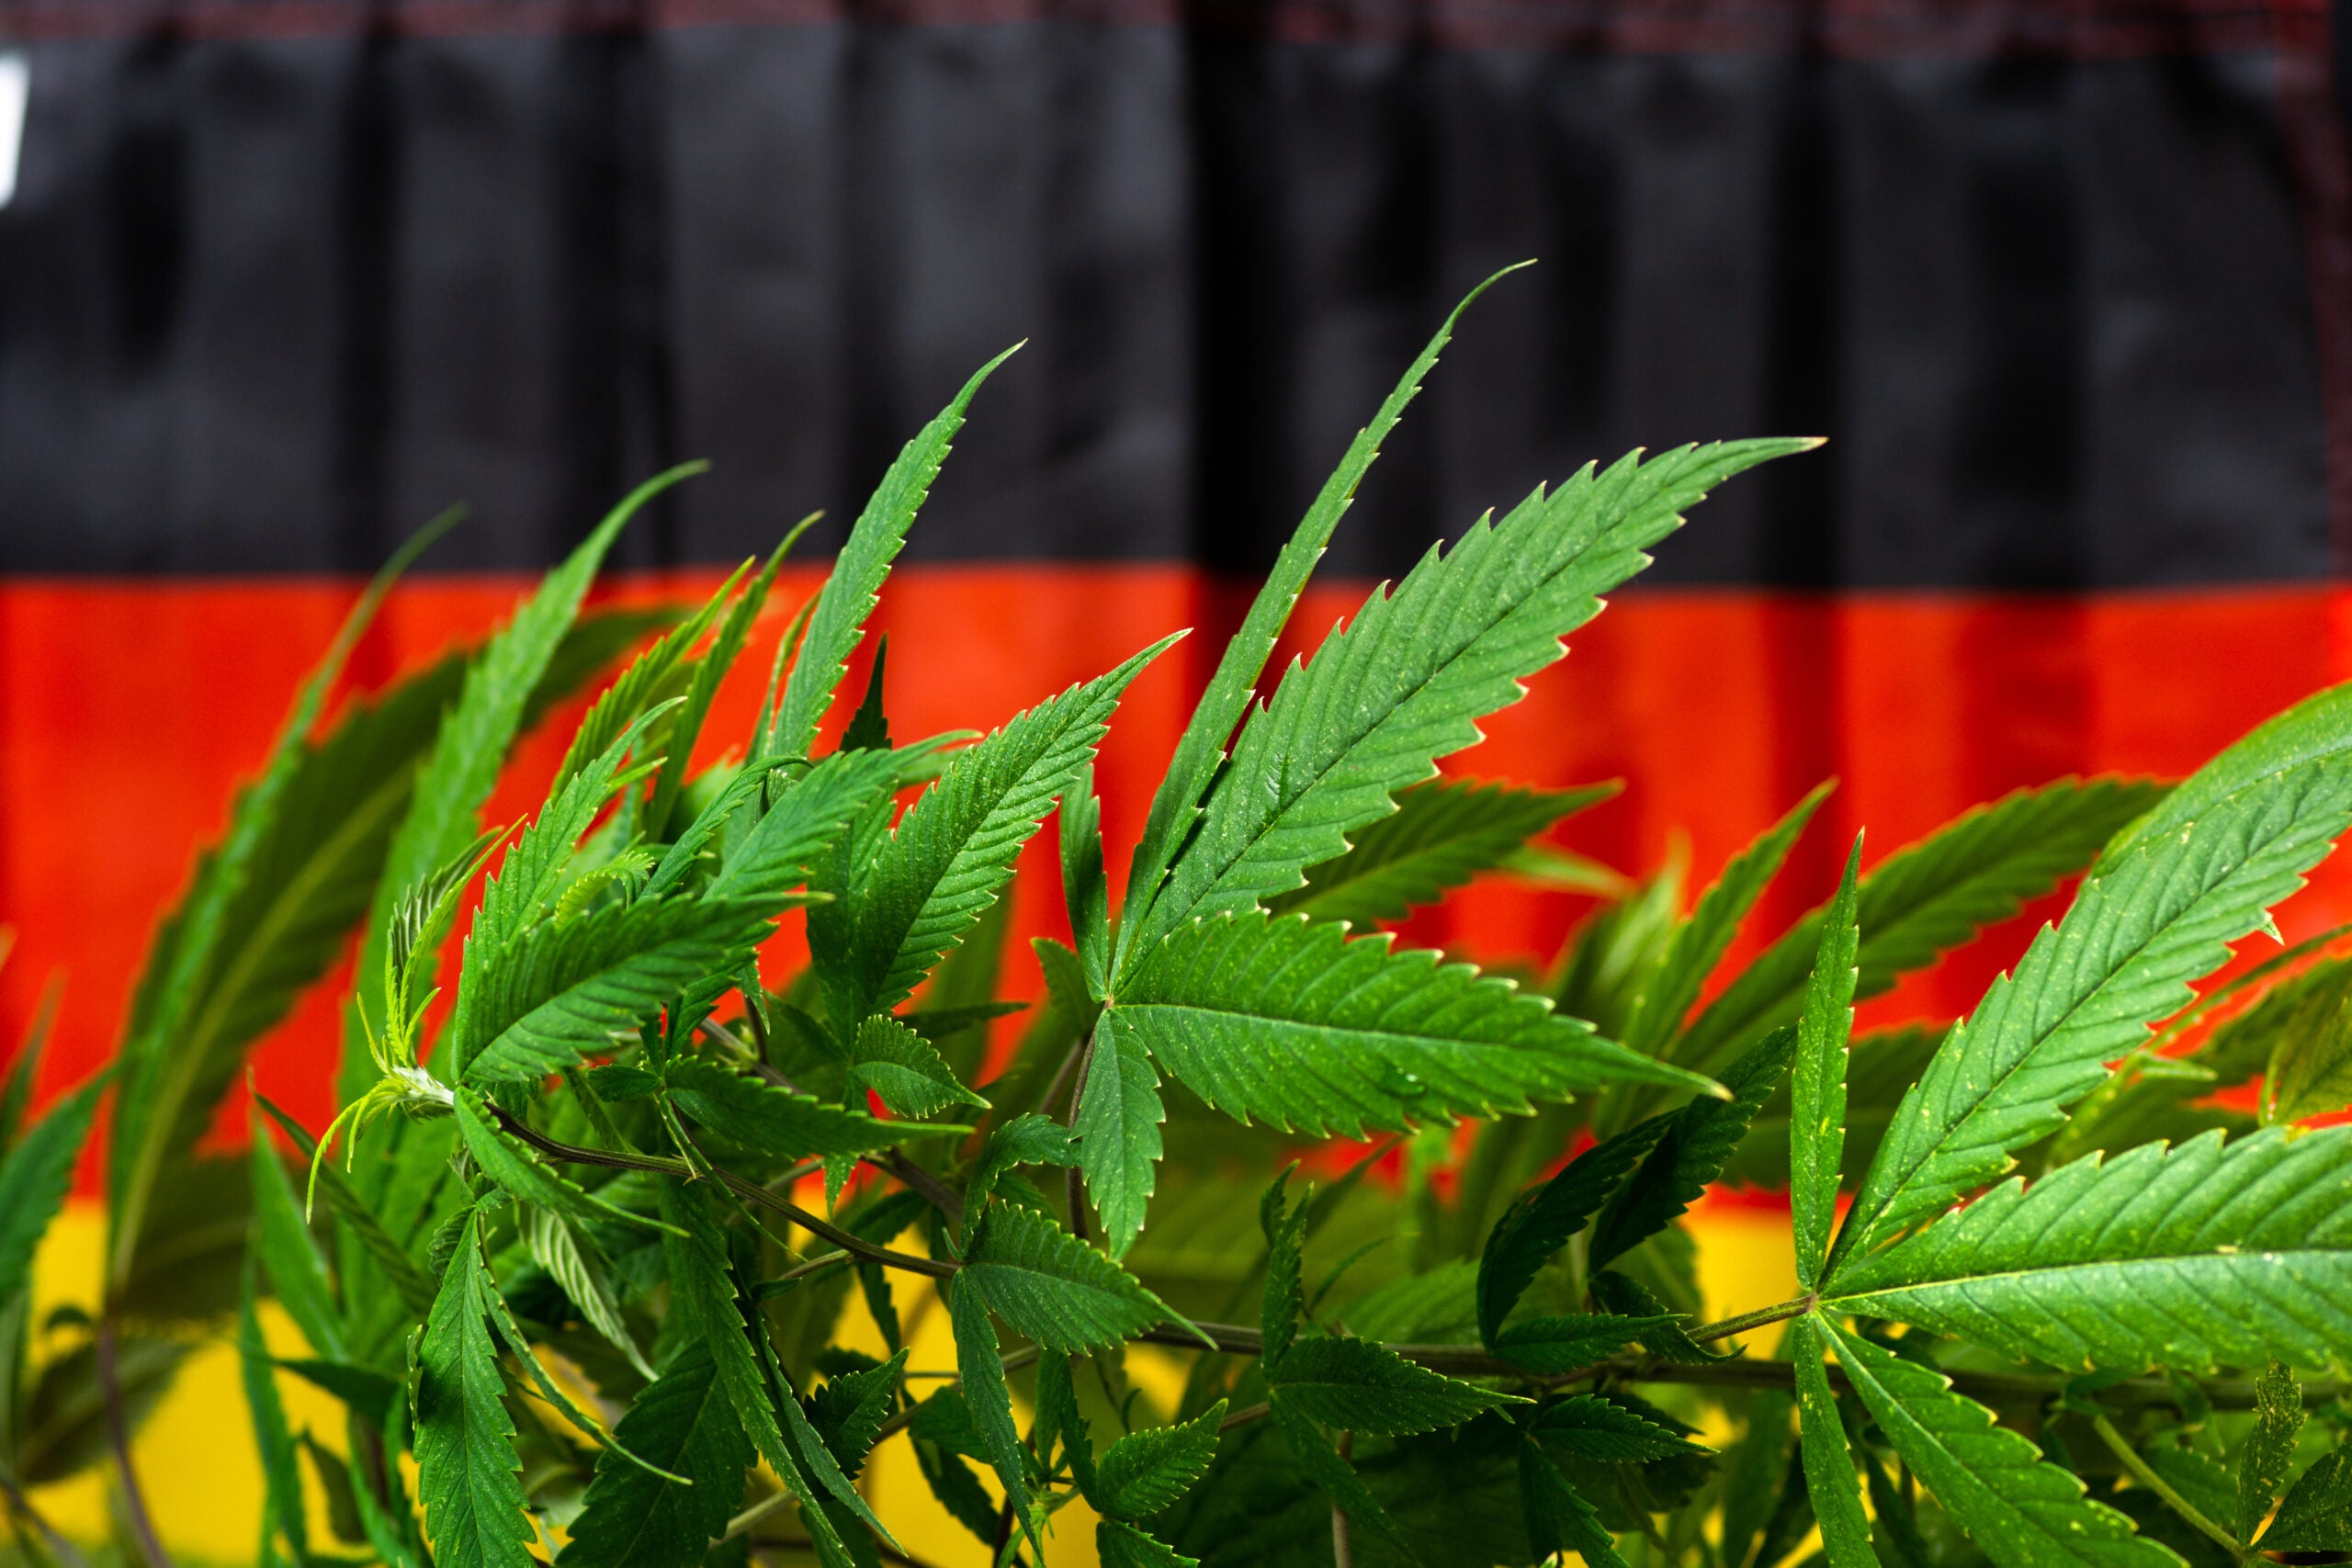 German Police Union Leaders Concerned About Legalizing Cannabis